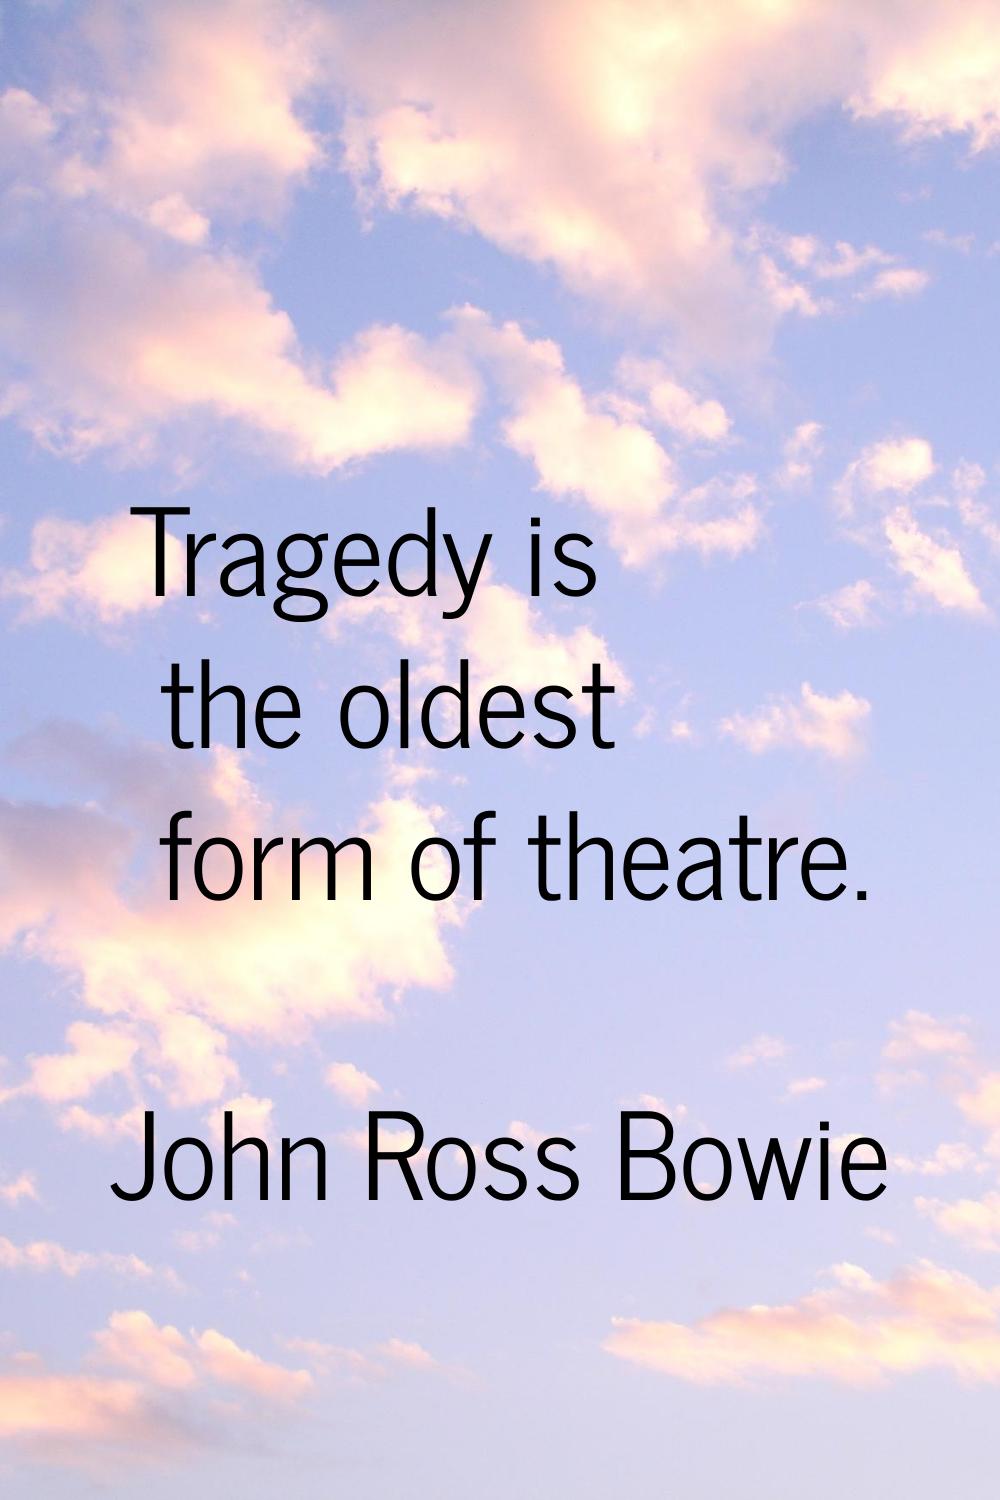 Tragedy is the oldest form of theatre.